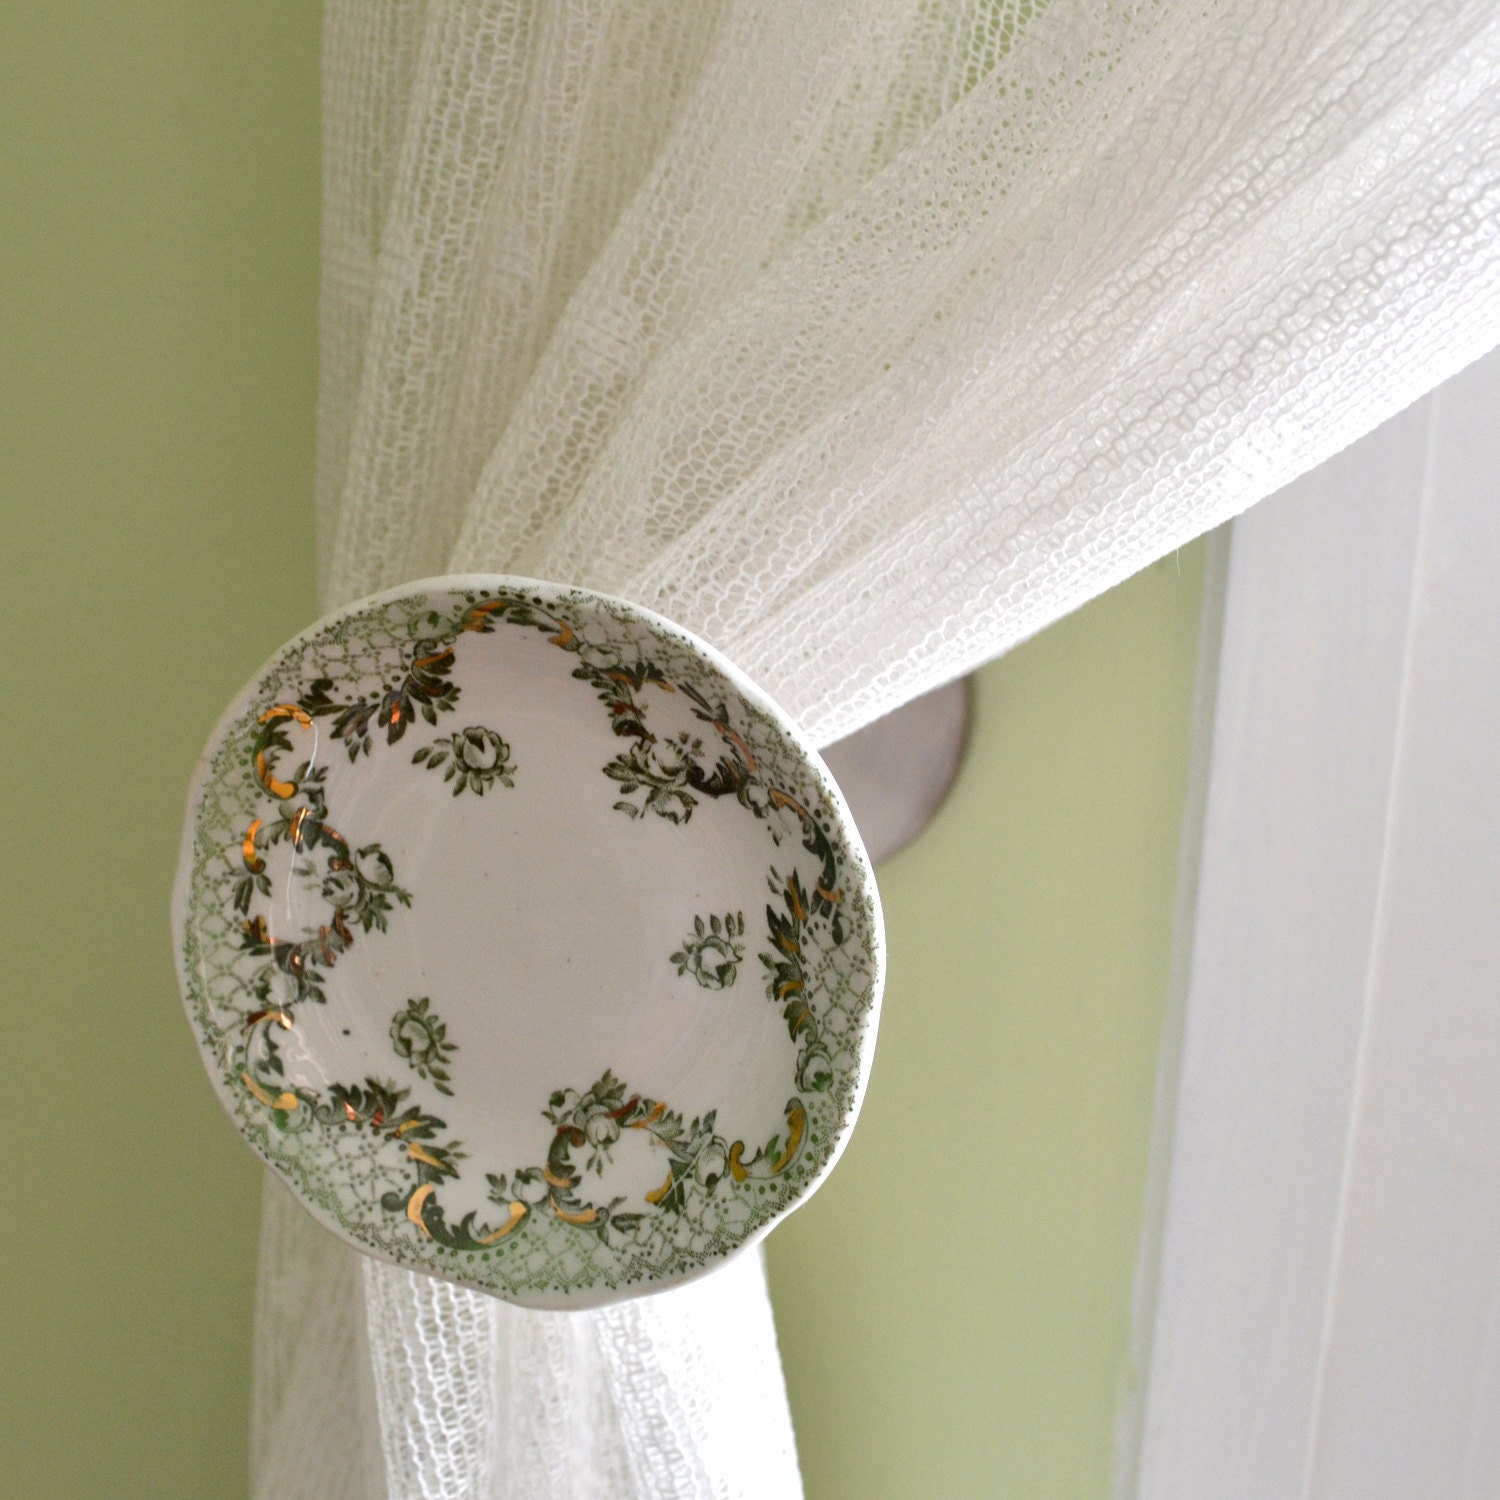 Recycled China Drapery Holdback - Green White and Gold - Curtain Tie Back